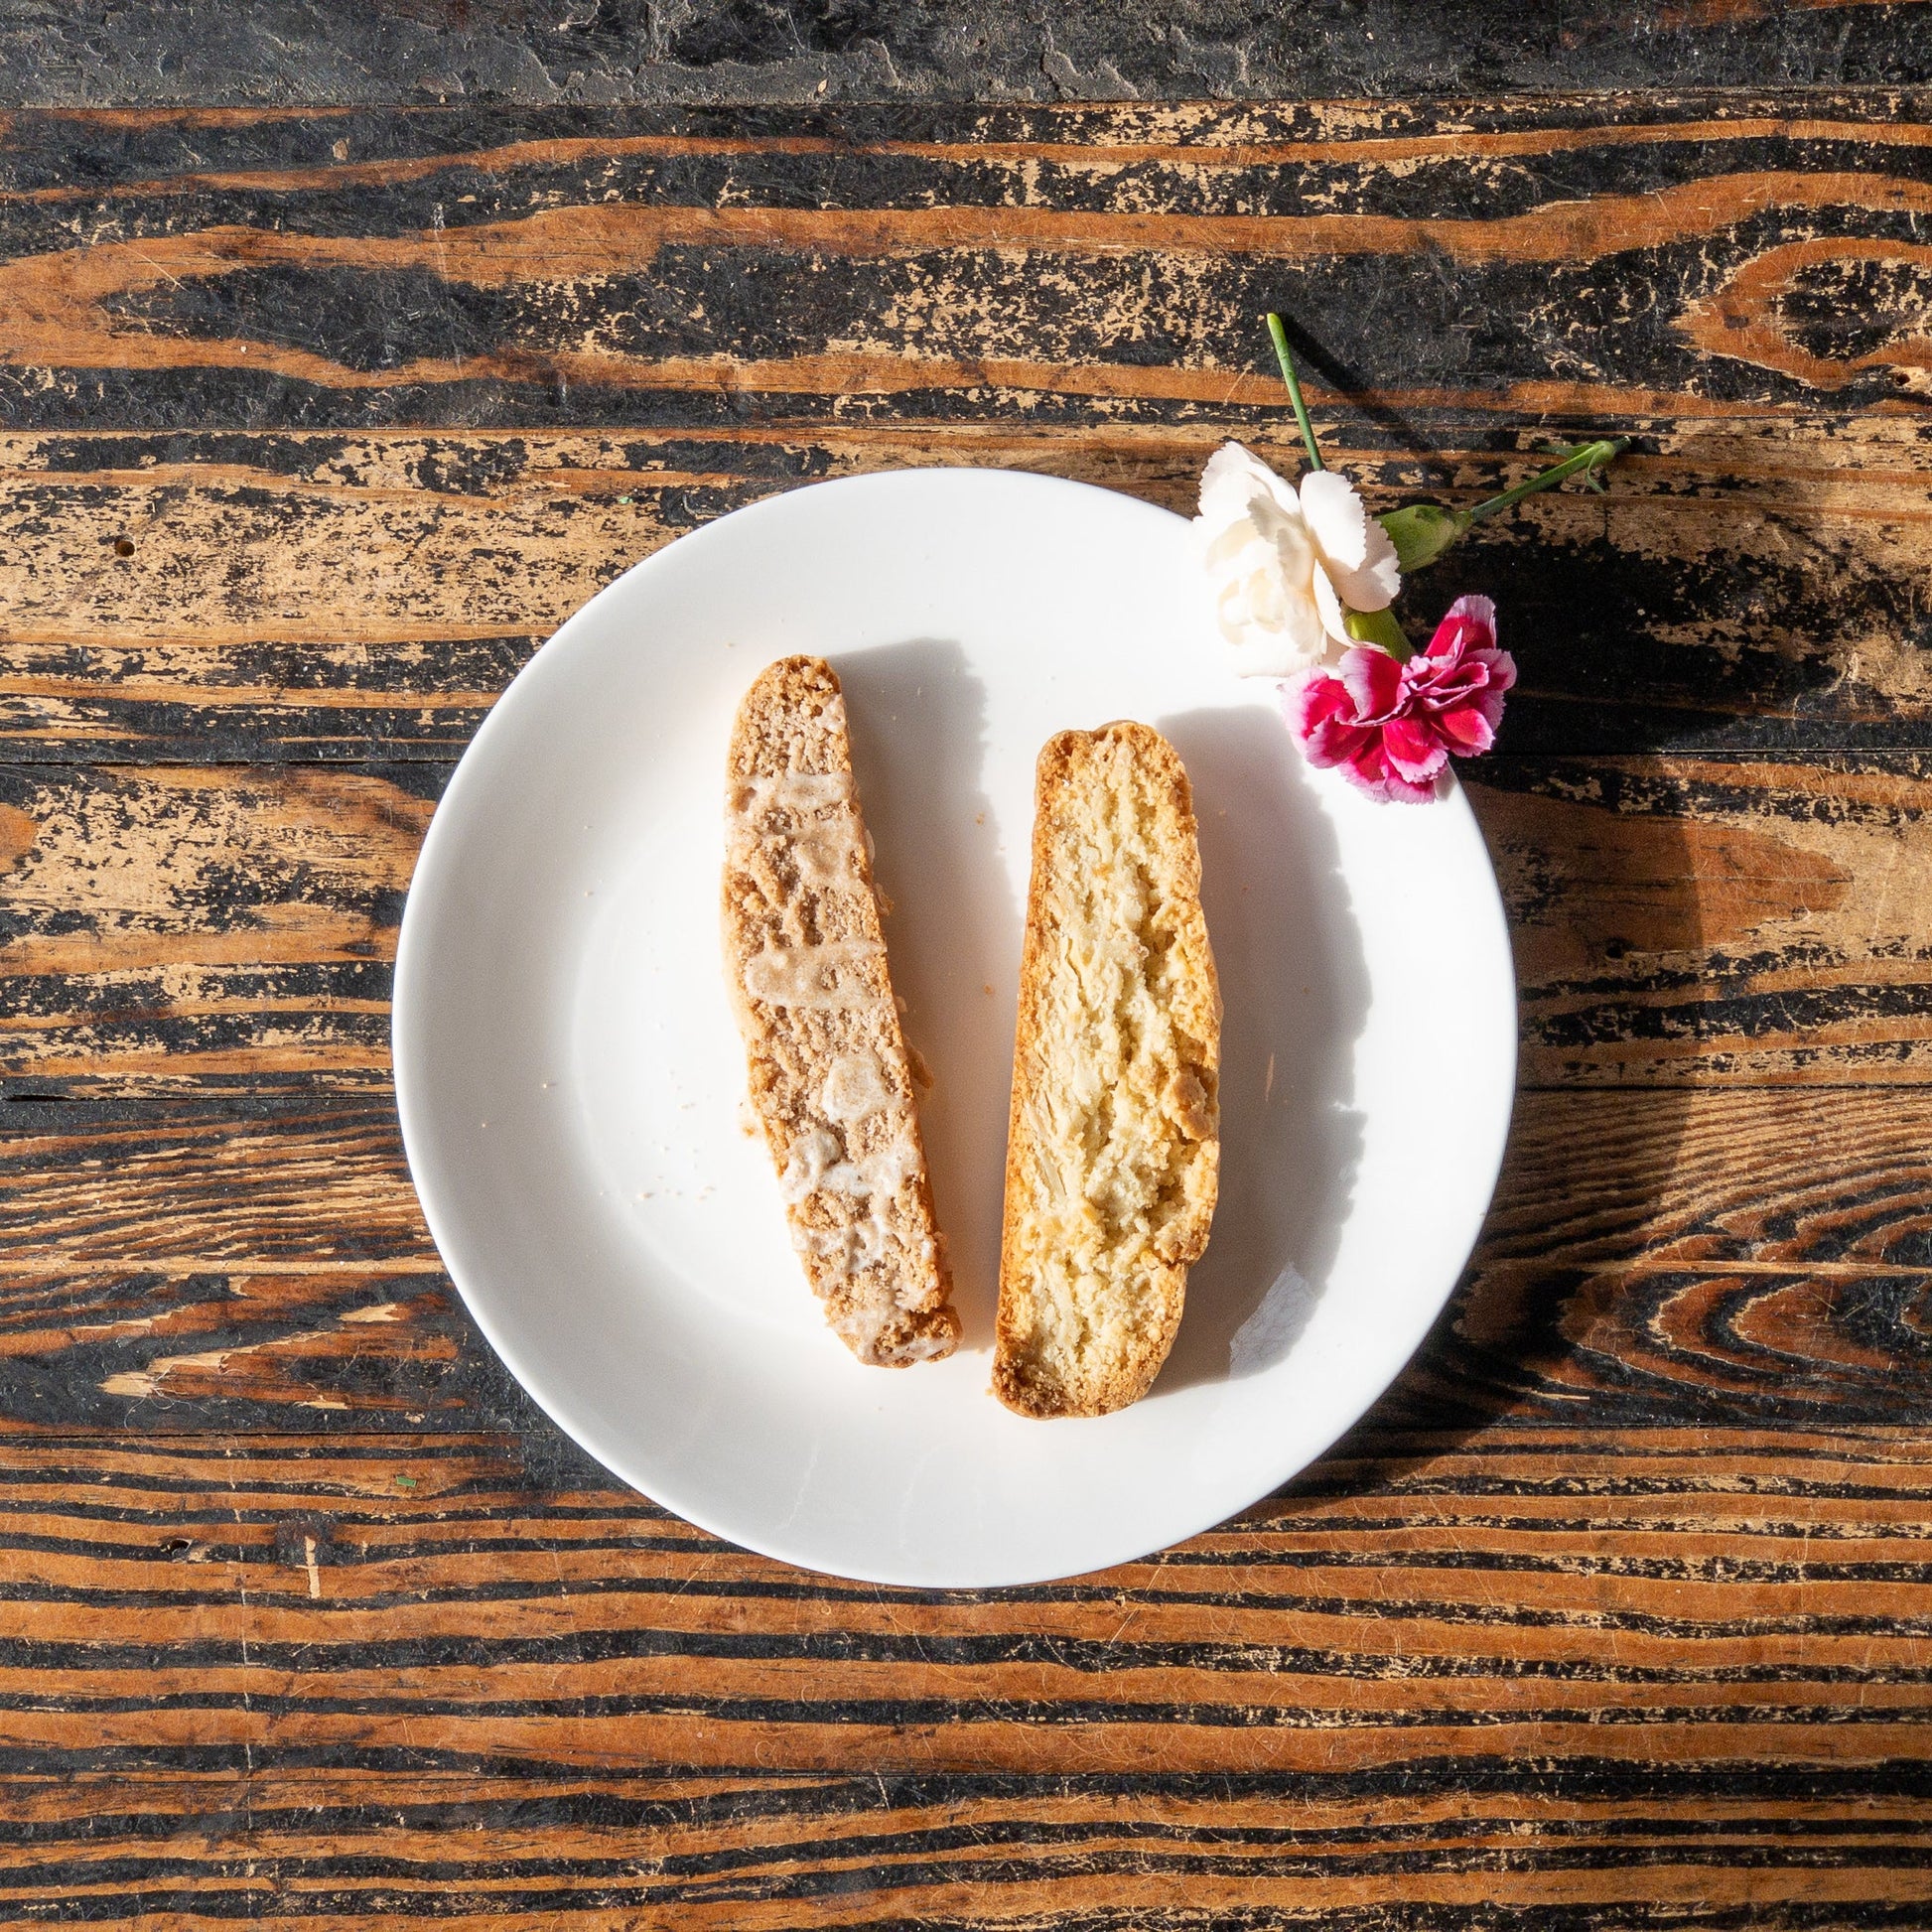 Handcrafted Italian Style Biscotti Baked Goods - The Meeting Place on Market